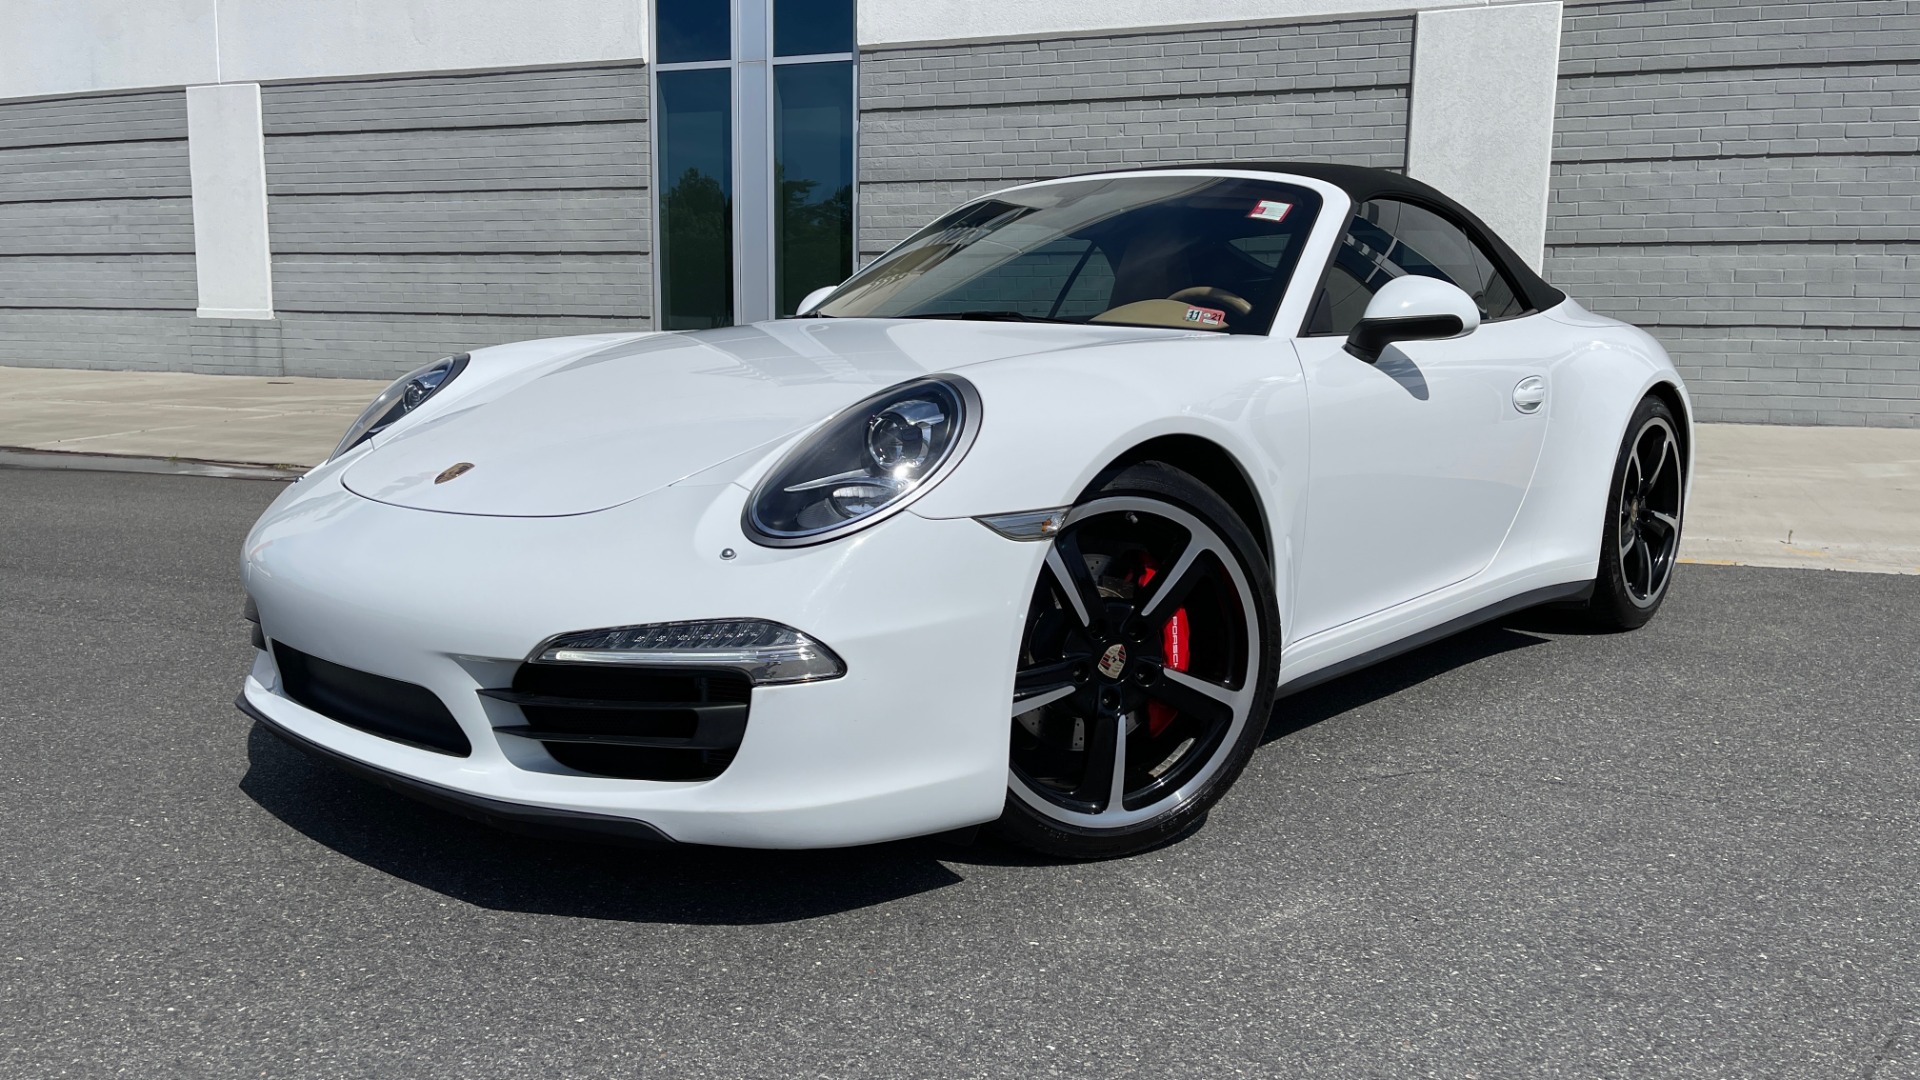 Used 2013 Porsche 911 CARRERA 4S CABRIOLET / PREMIUM PLUS / BOSE / PDK / PDLS for sale Sold at Formula Imports in Charlotte NC 28227 2